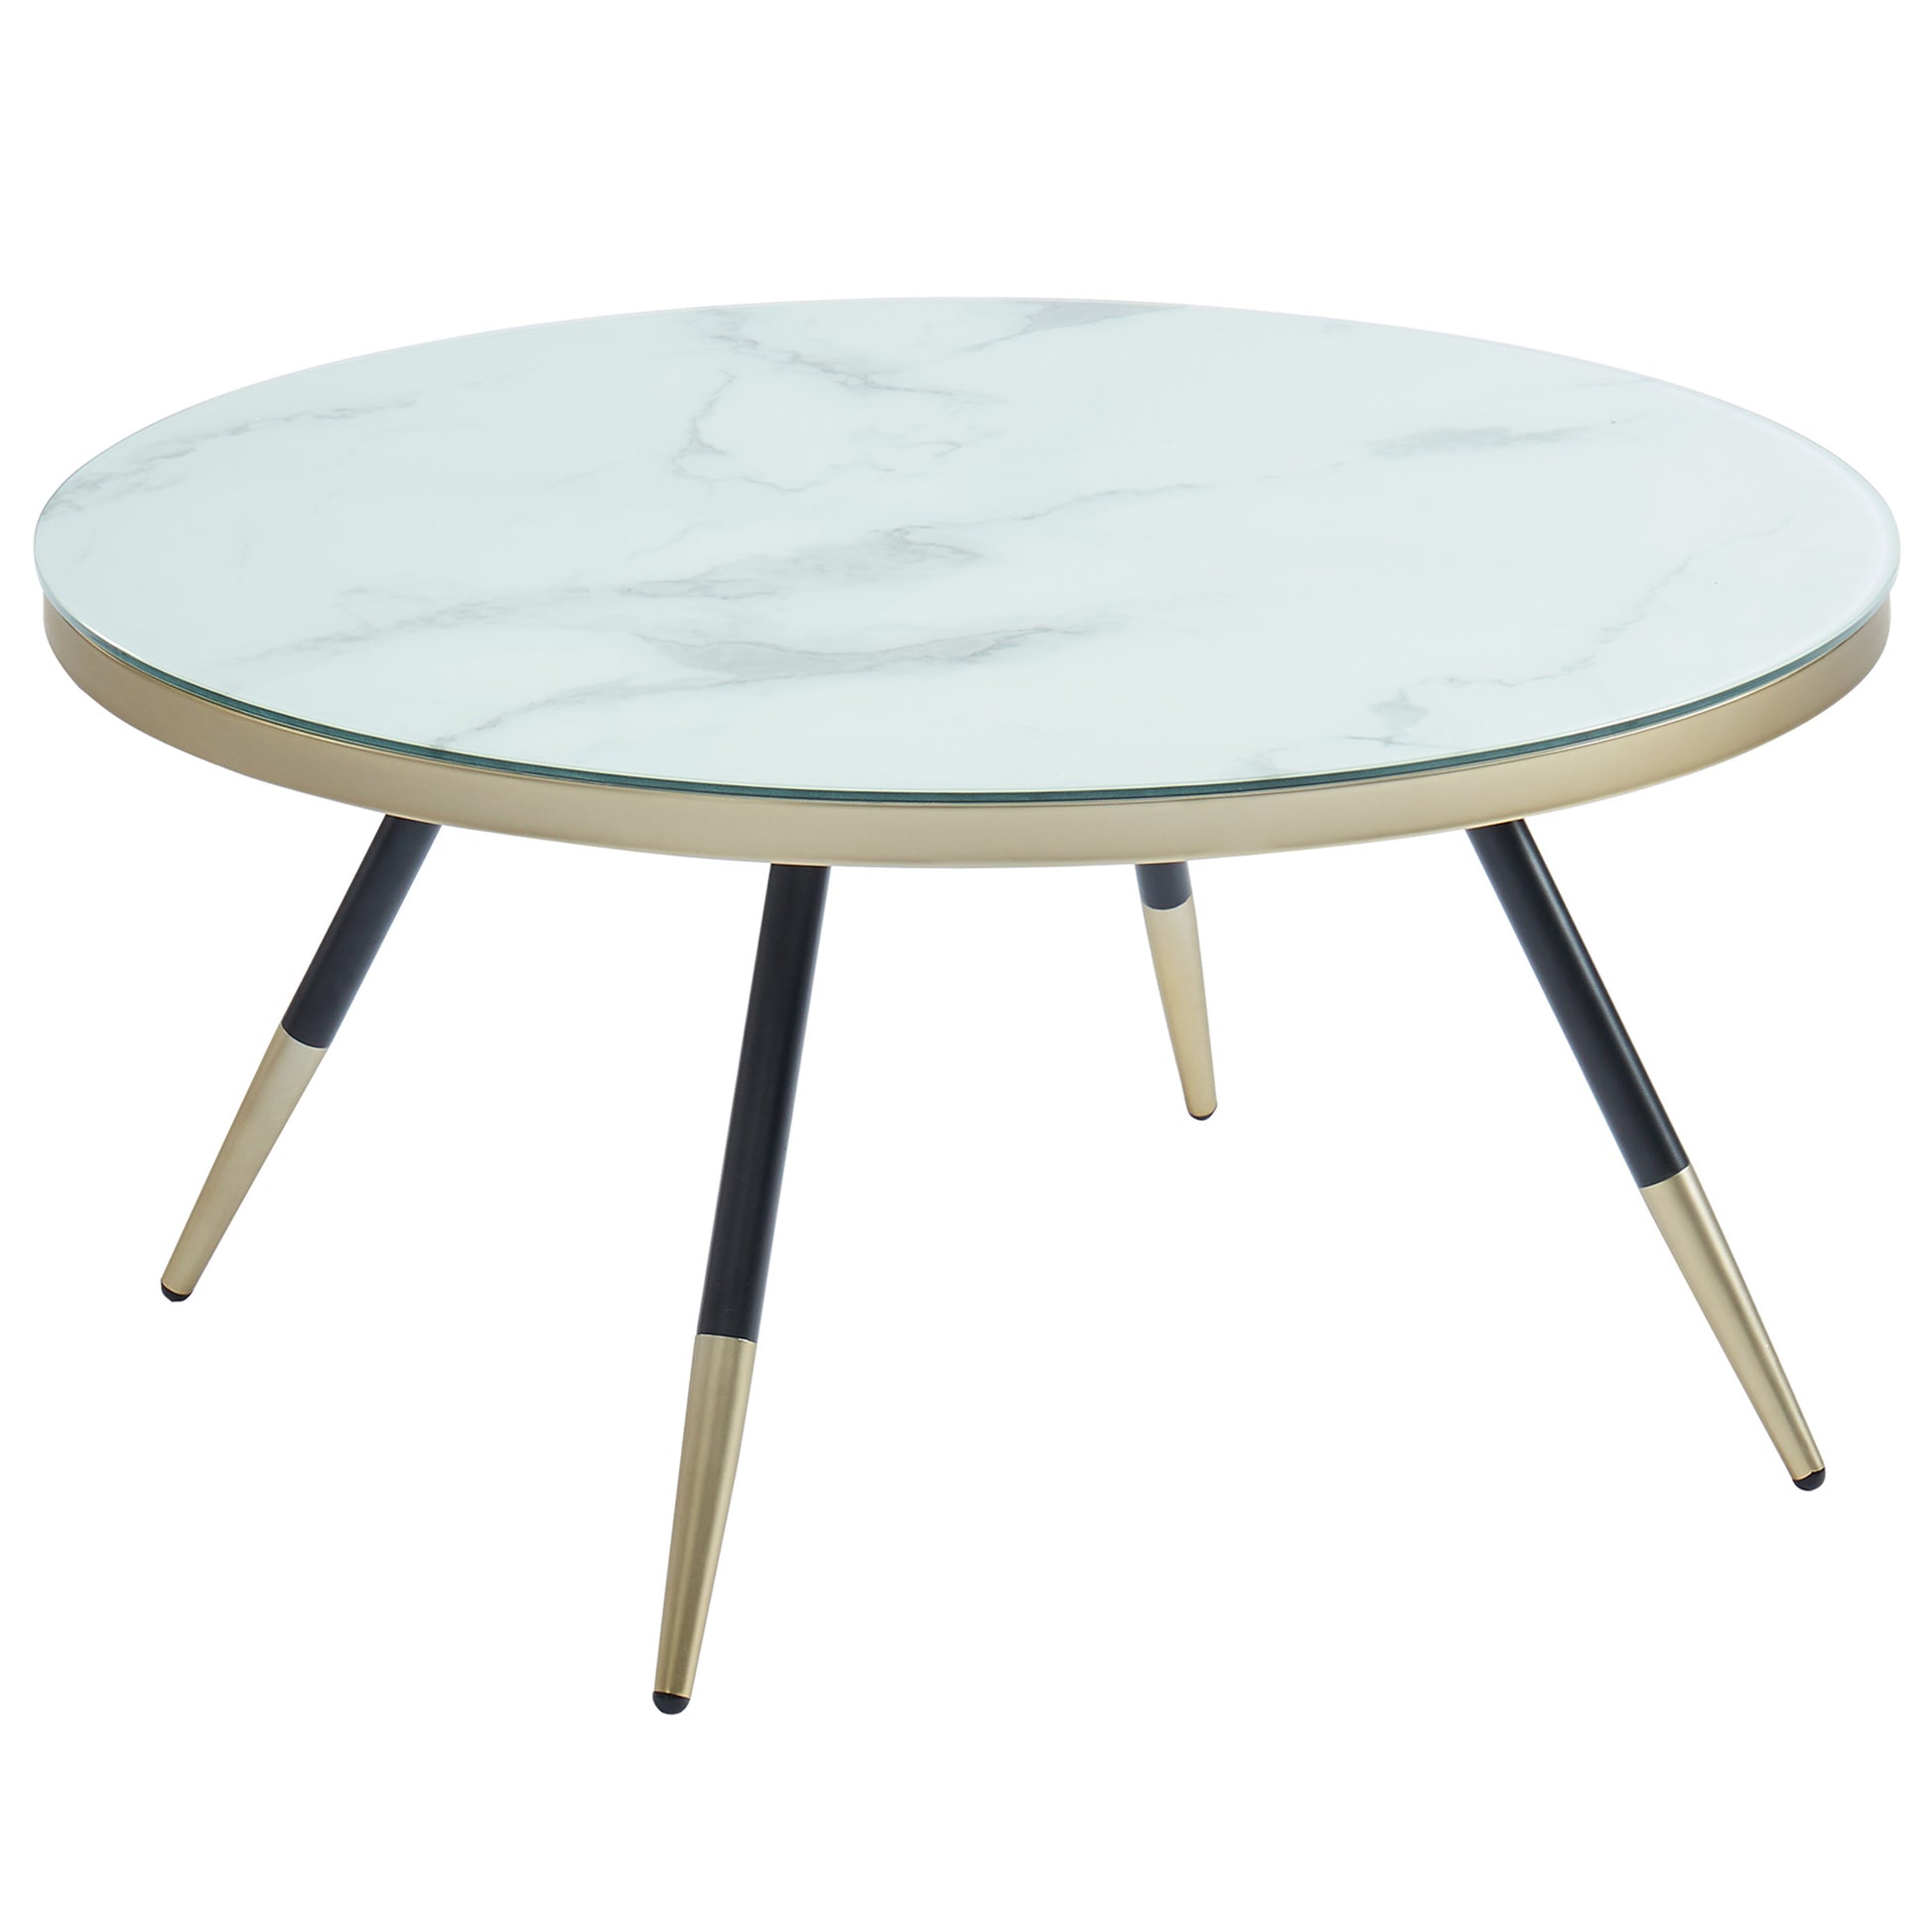 Cordelia Coffee Table in White - Dreamart Gallery